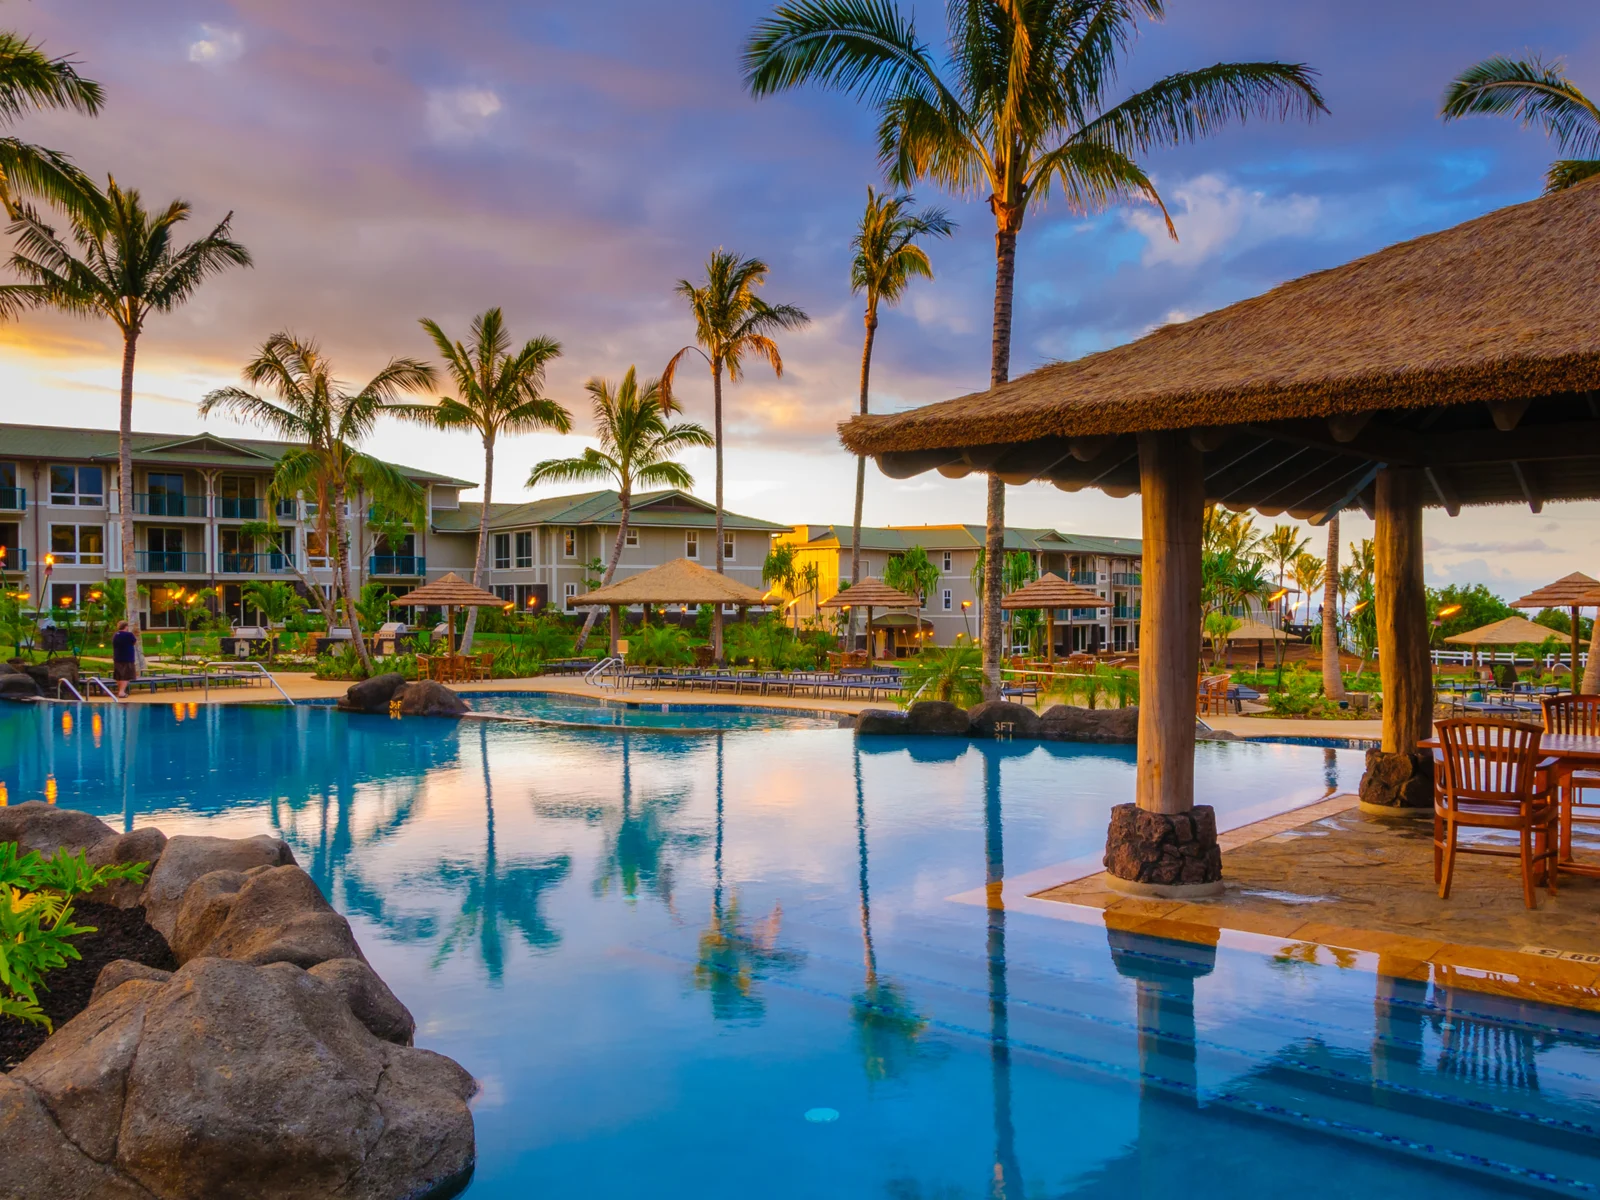 The Westin Resort pool and cabana at sunset in Princeville, a piece on the best hotels in Kauai